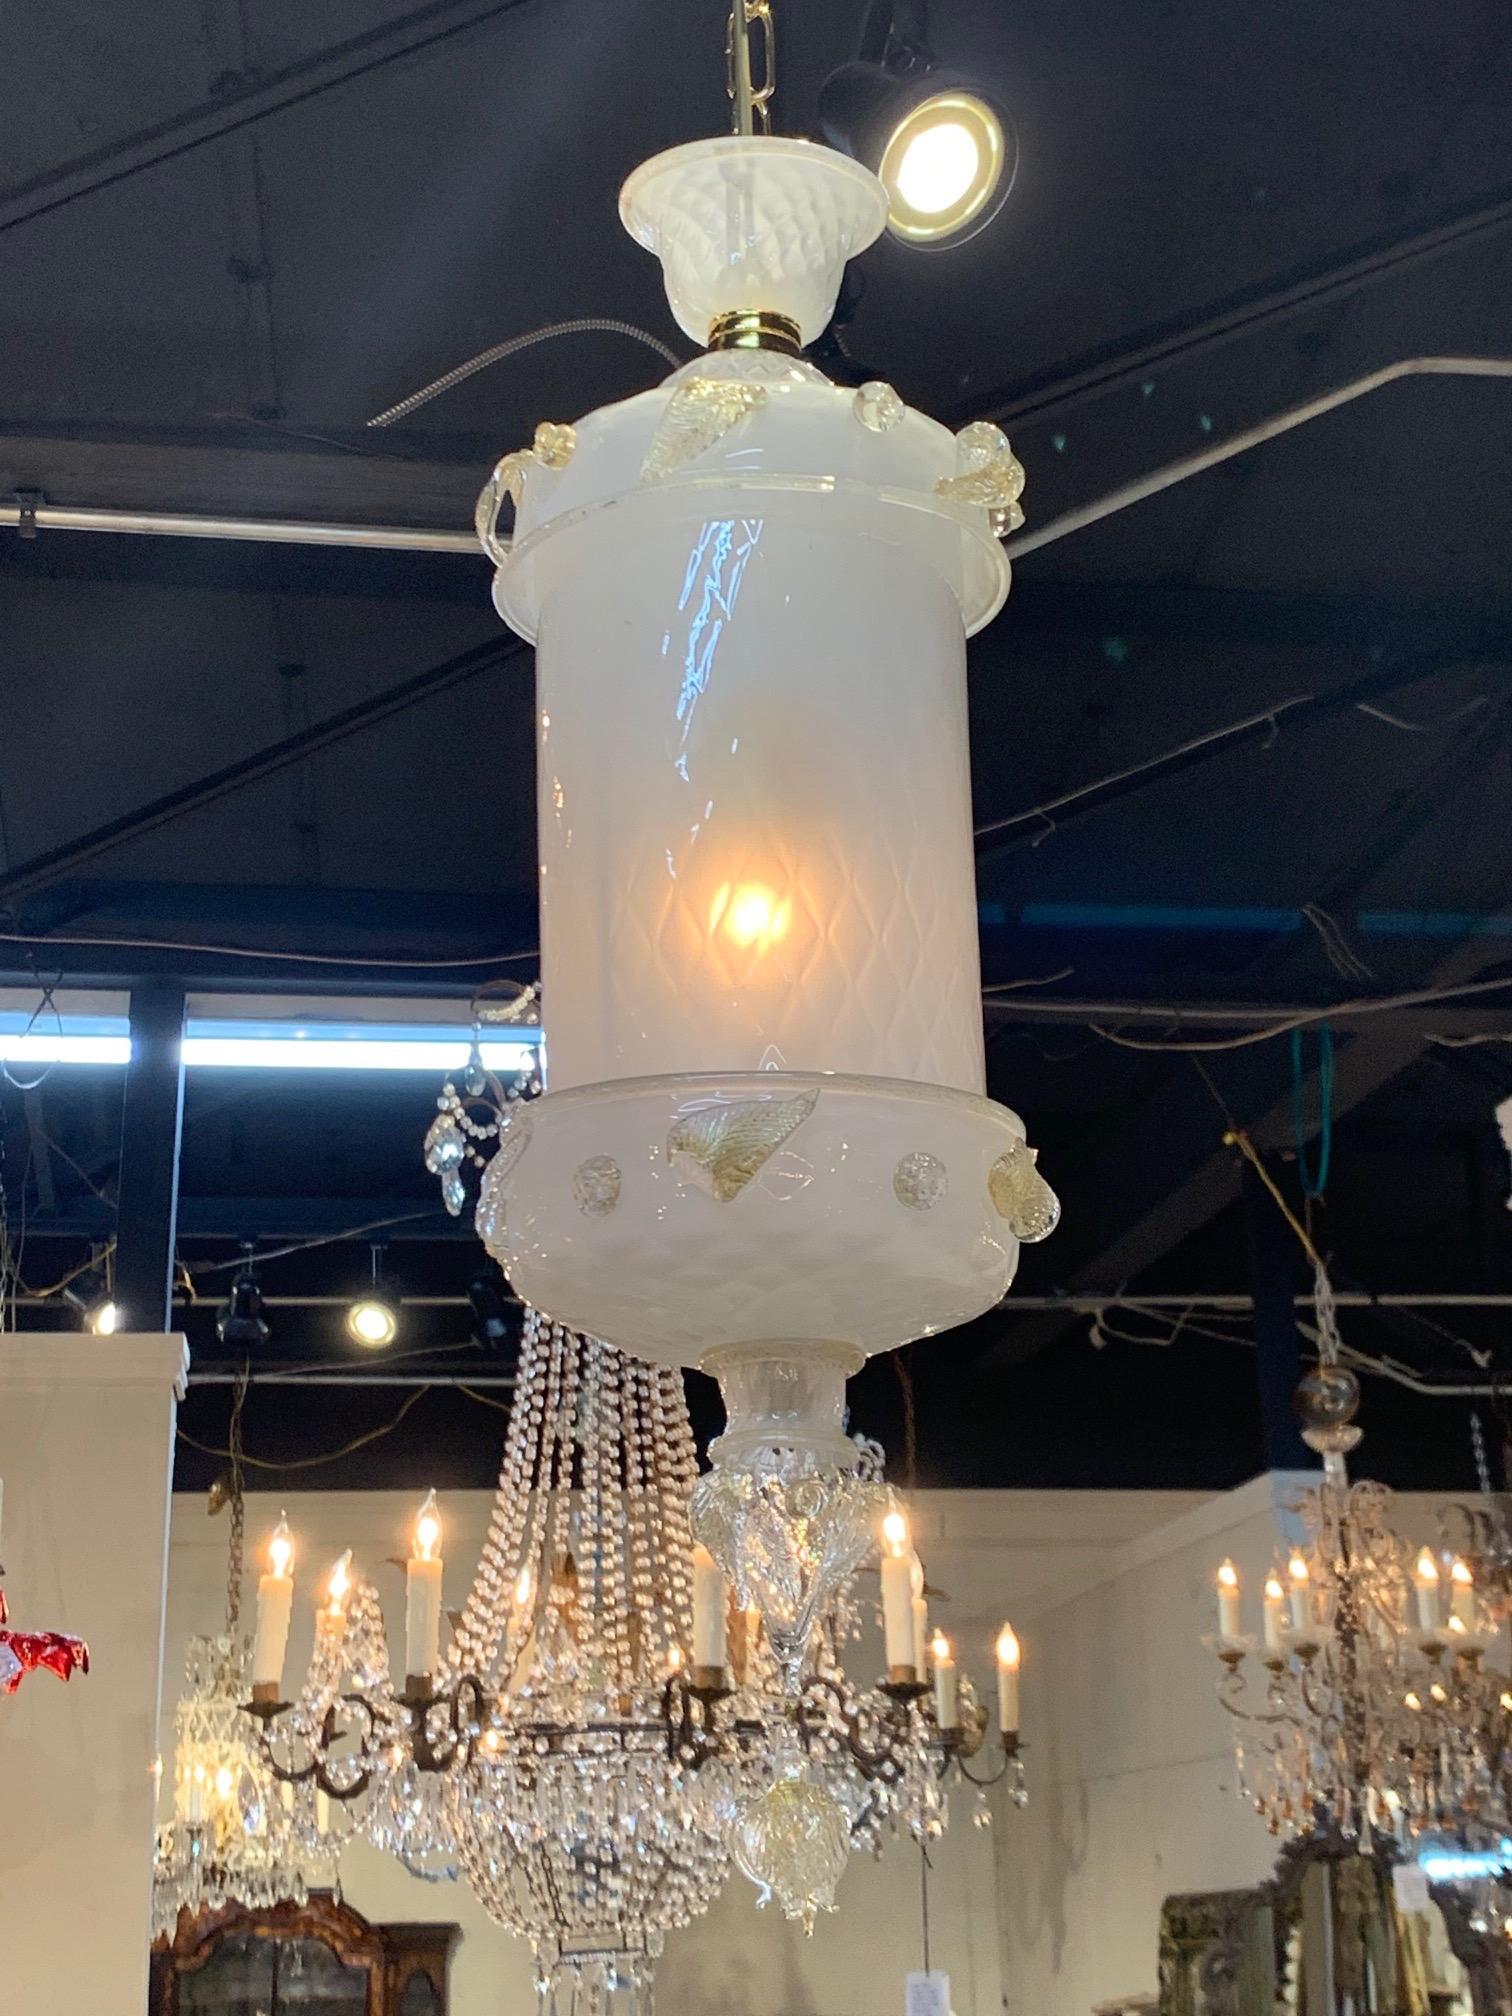 Stunning pair of vintage Murano glass lanterns. Milky white Murano glass with touches of gold. Great scale and shape on these. Adds a beautiful decorative touch!! Note: Price listed is per item.